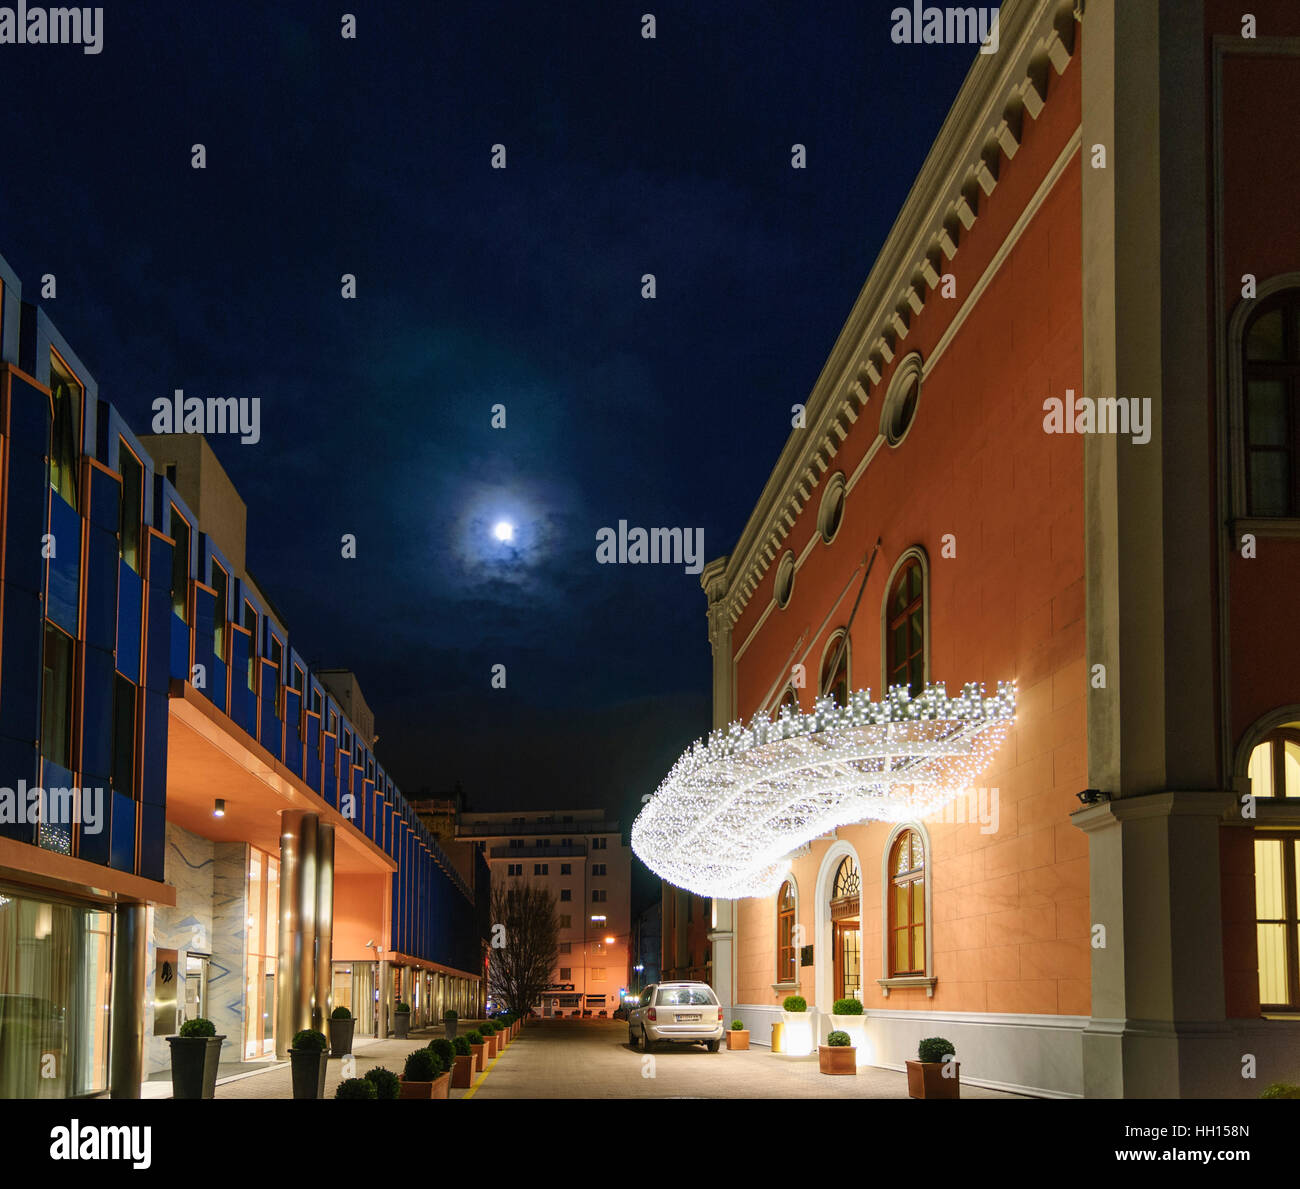 Wien, Vienna: Hotel 'The Imperial Riding School', a former riding academy from 1850, with full moon, 03., Wien, Austria Stock Photo